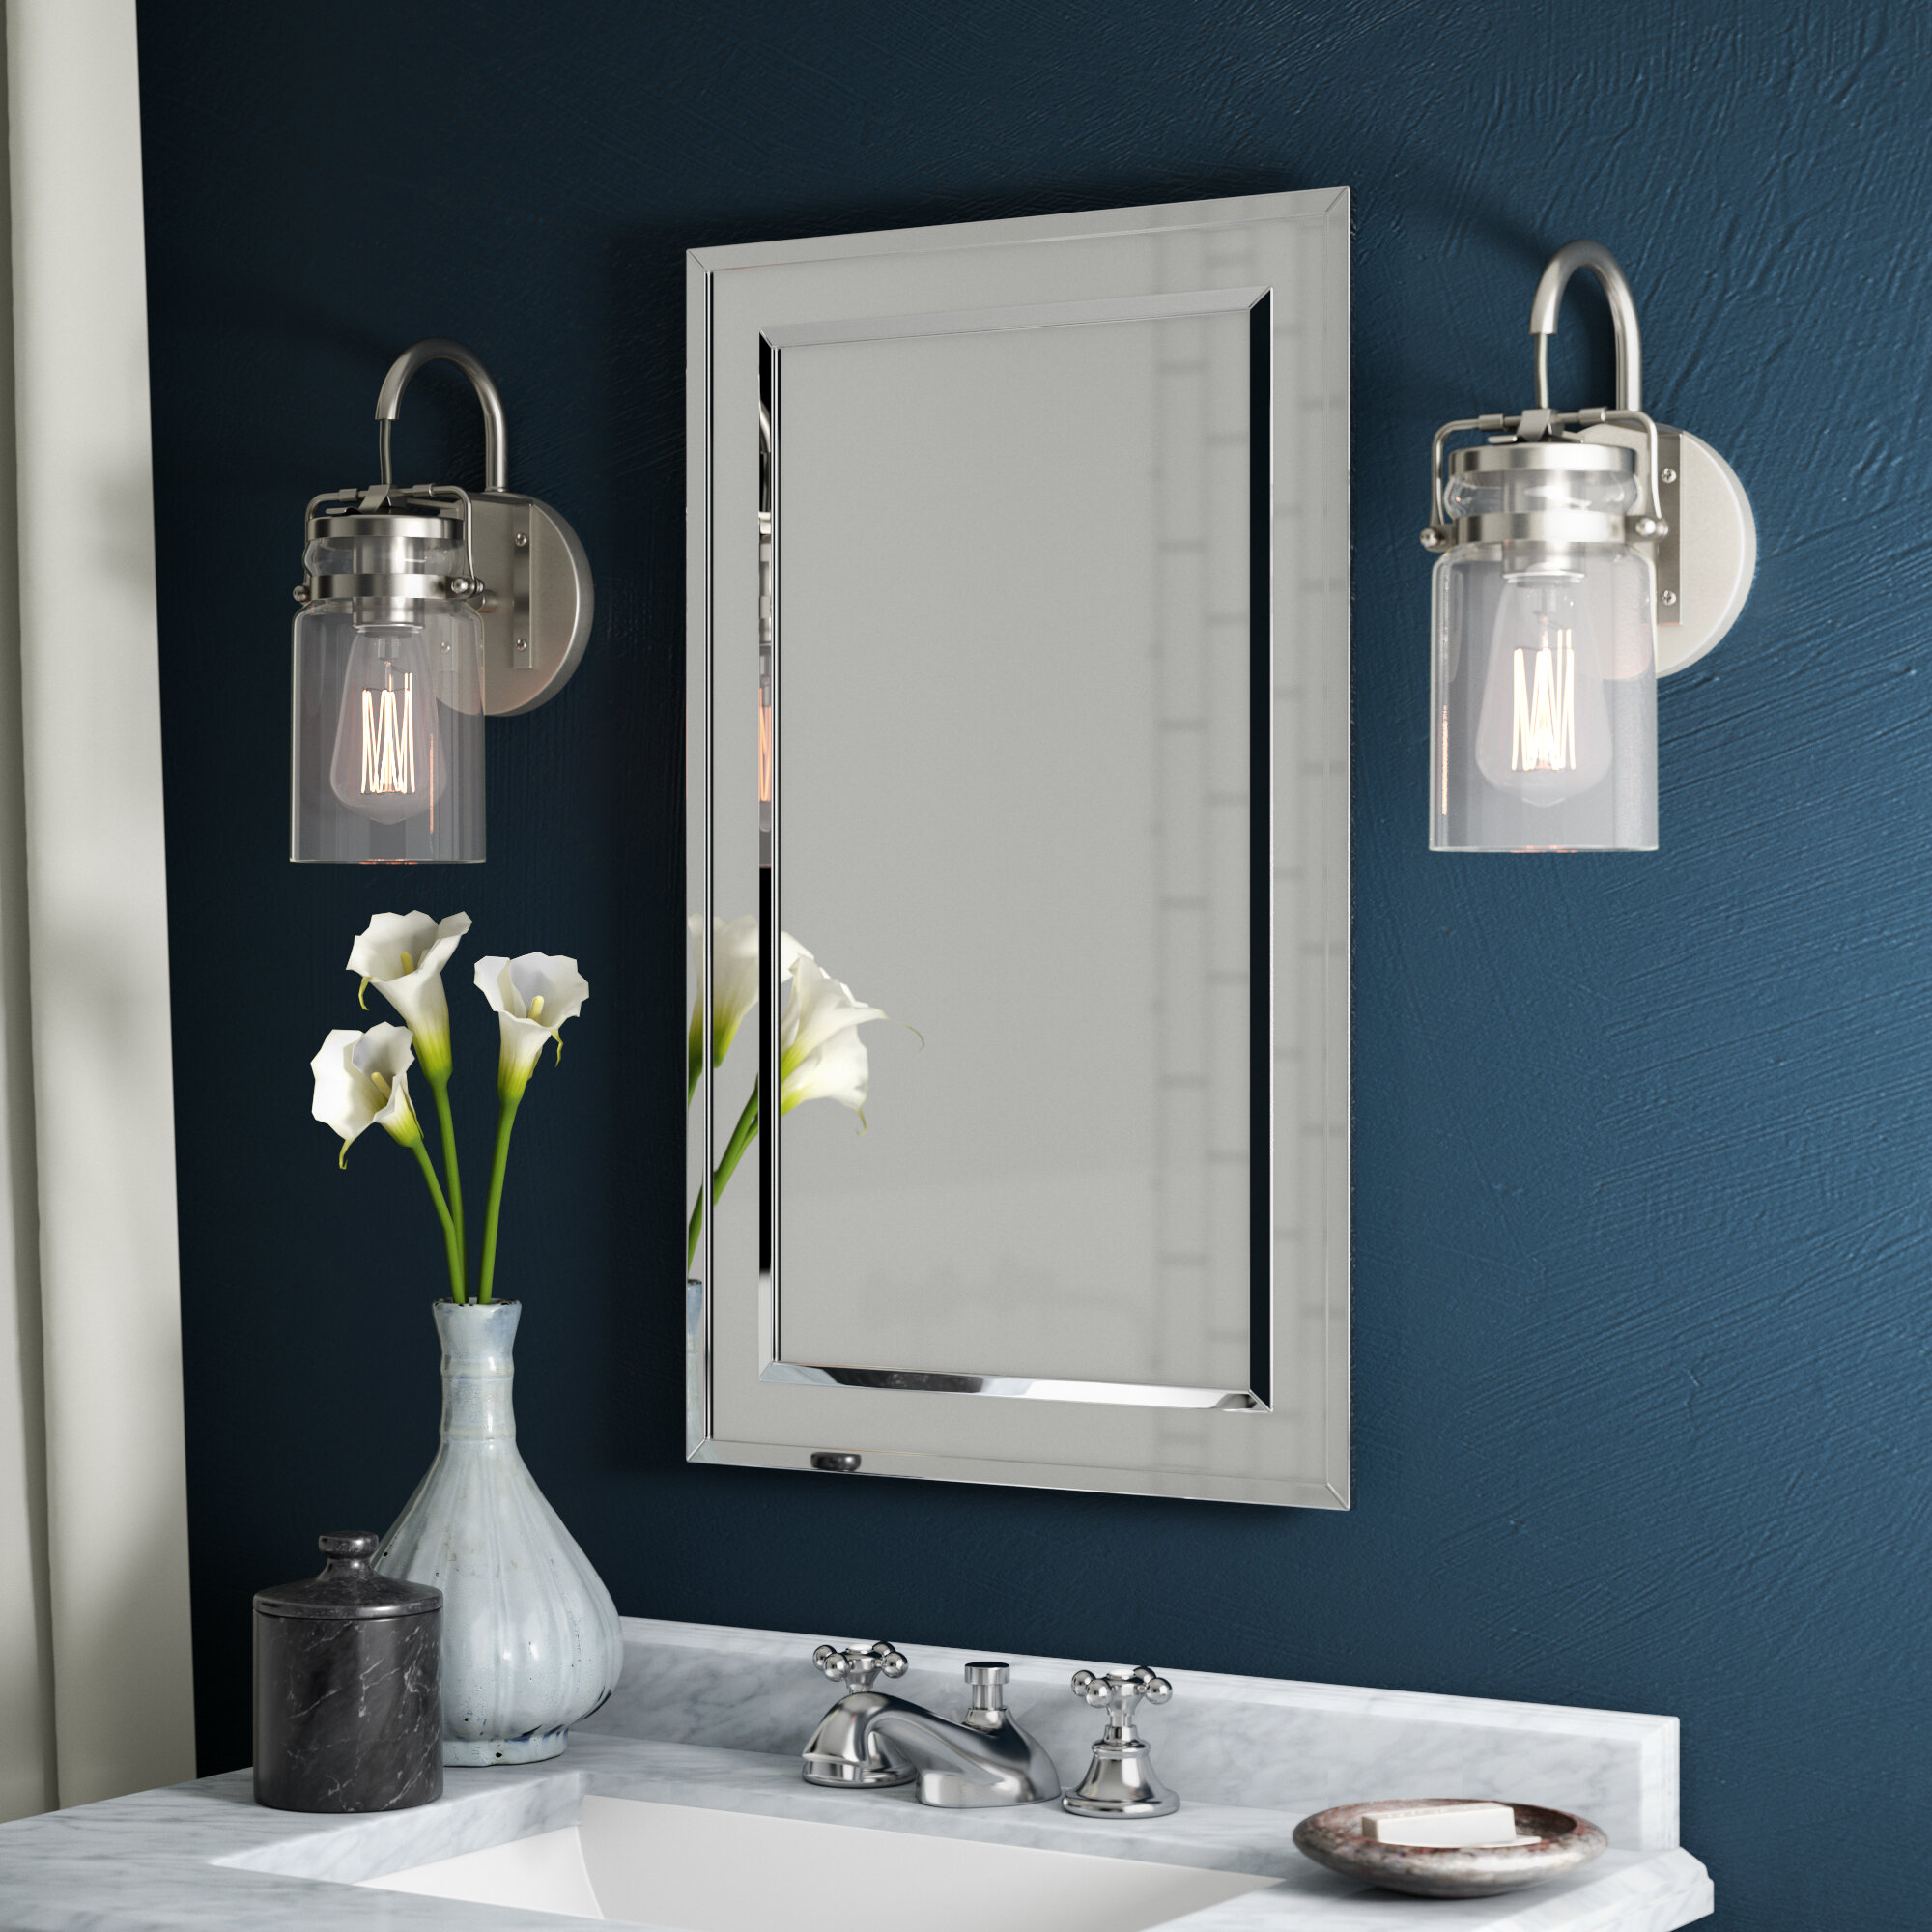 Recessed Medicine Cabinets Sale Up To 65 Off Through 4 24 Wayfair